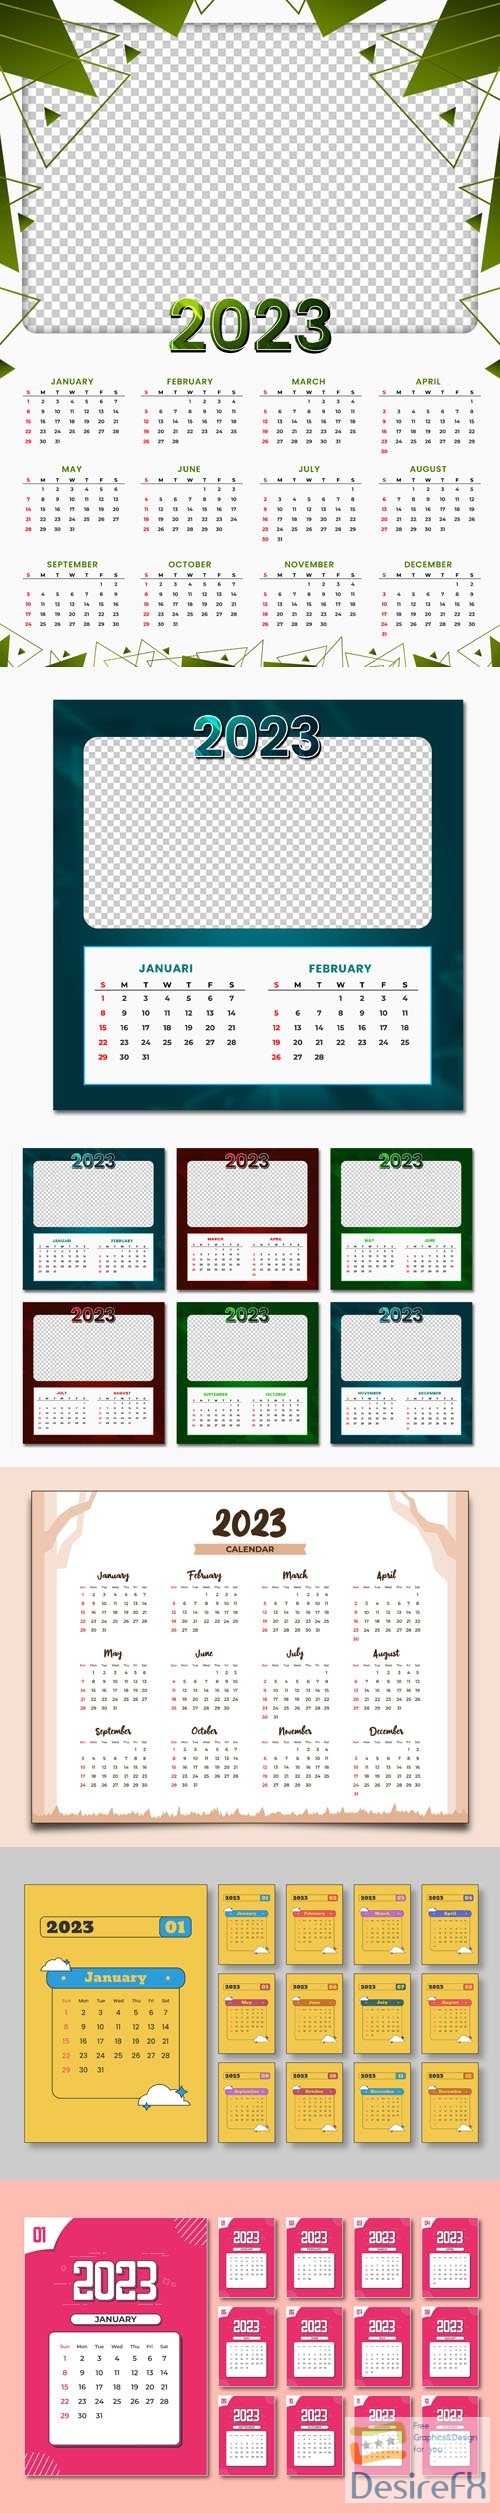 5 Calendars for New Year 2023 PSD Templates